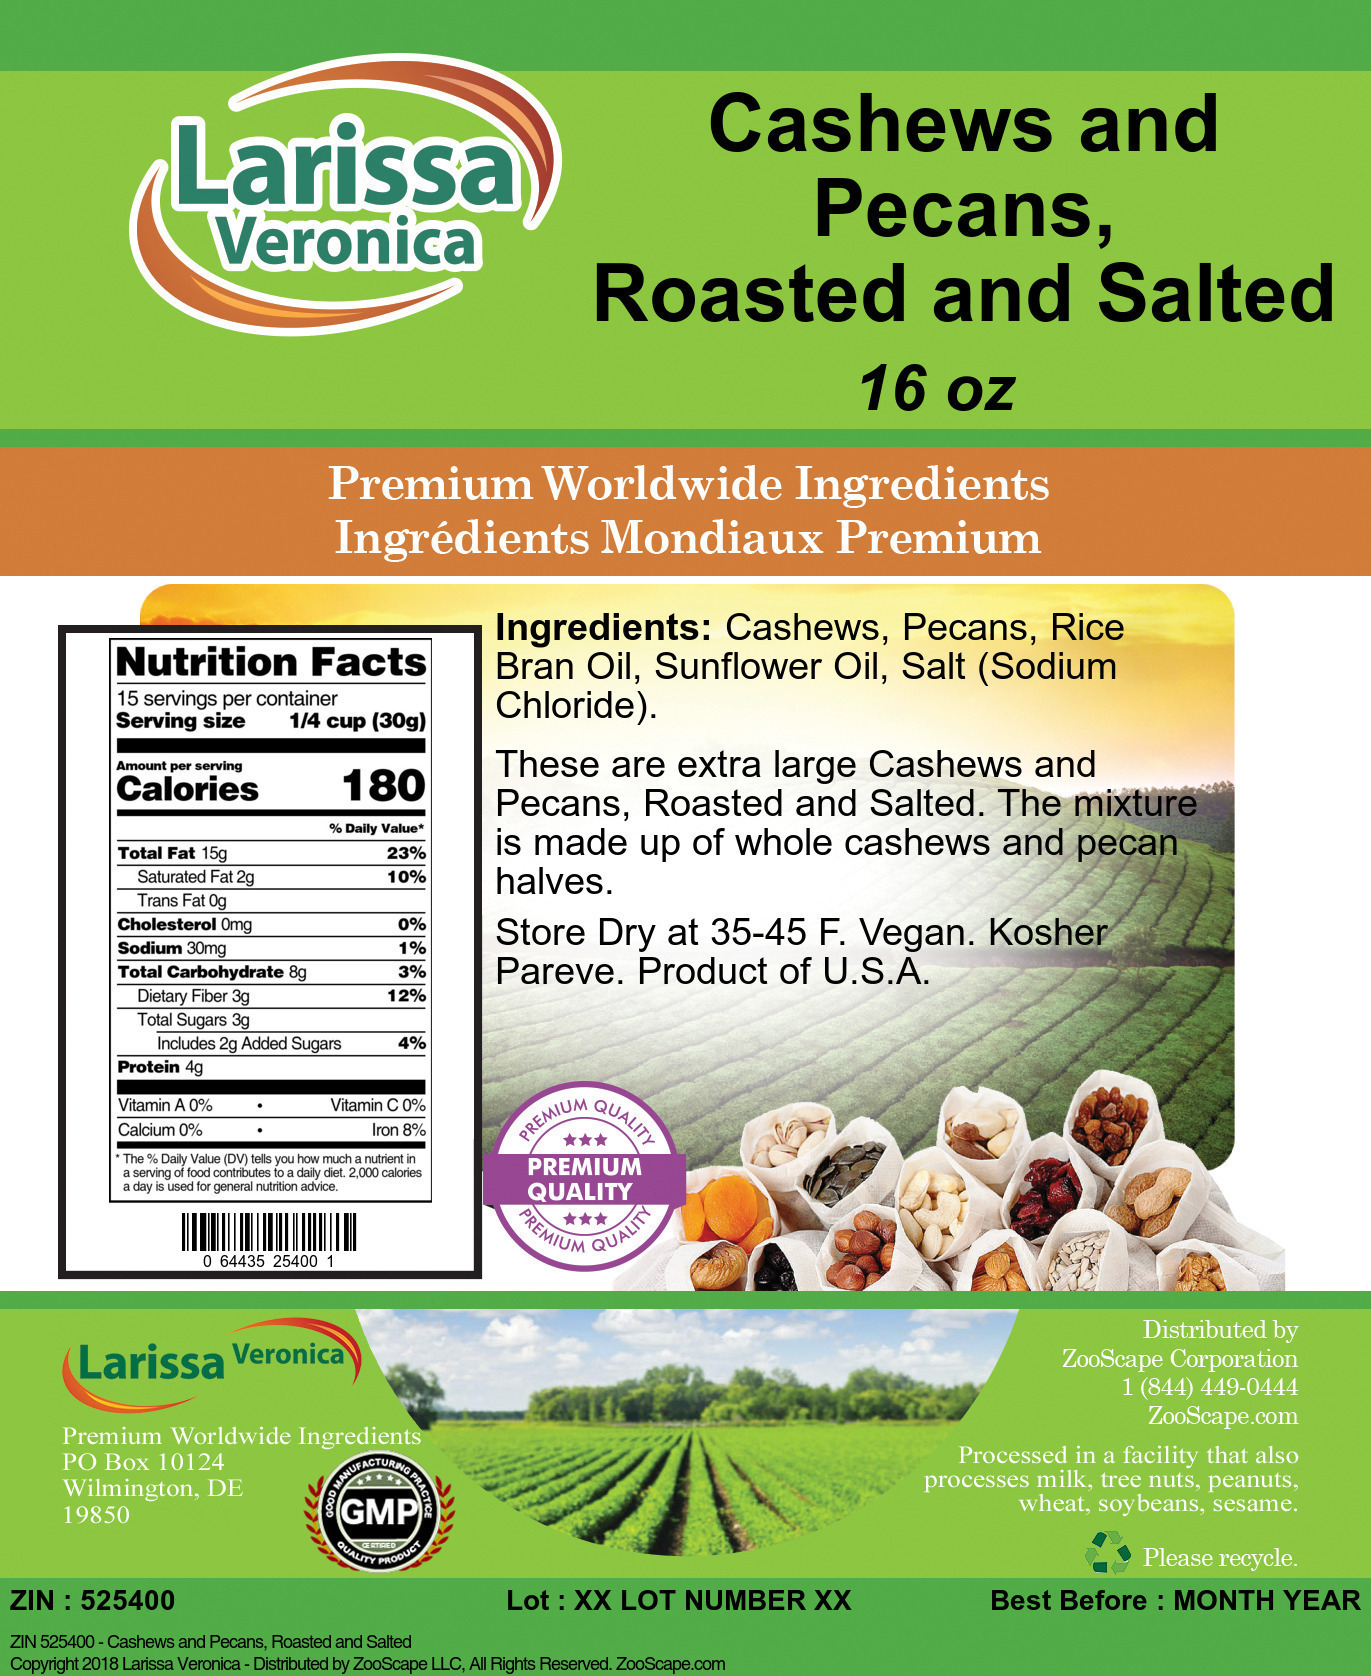 Cashews and Pecans, Roasted and Salted - Label